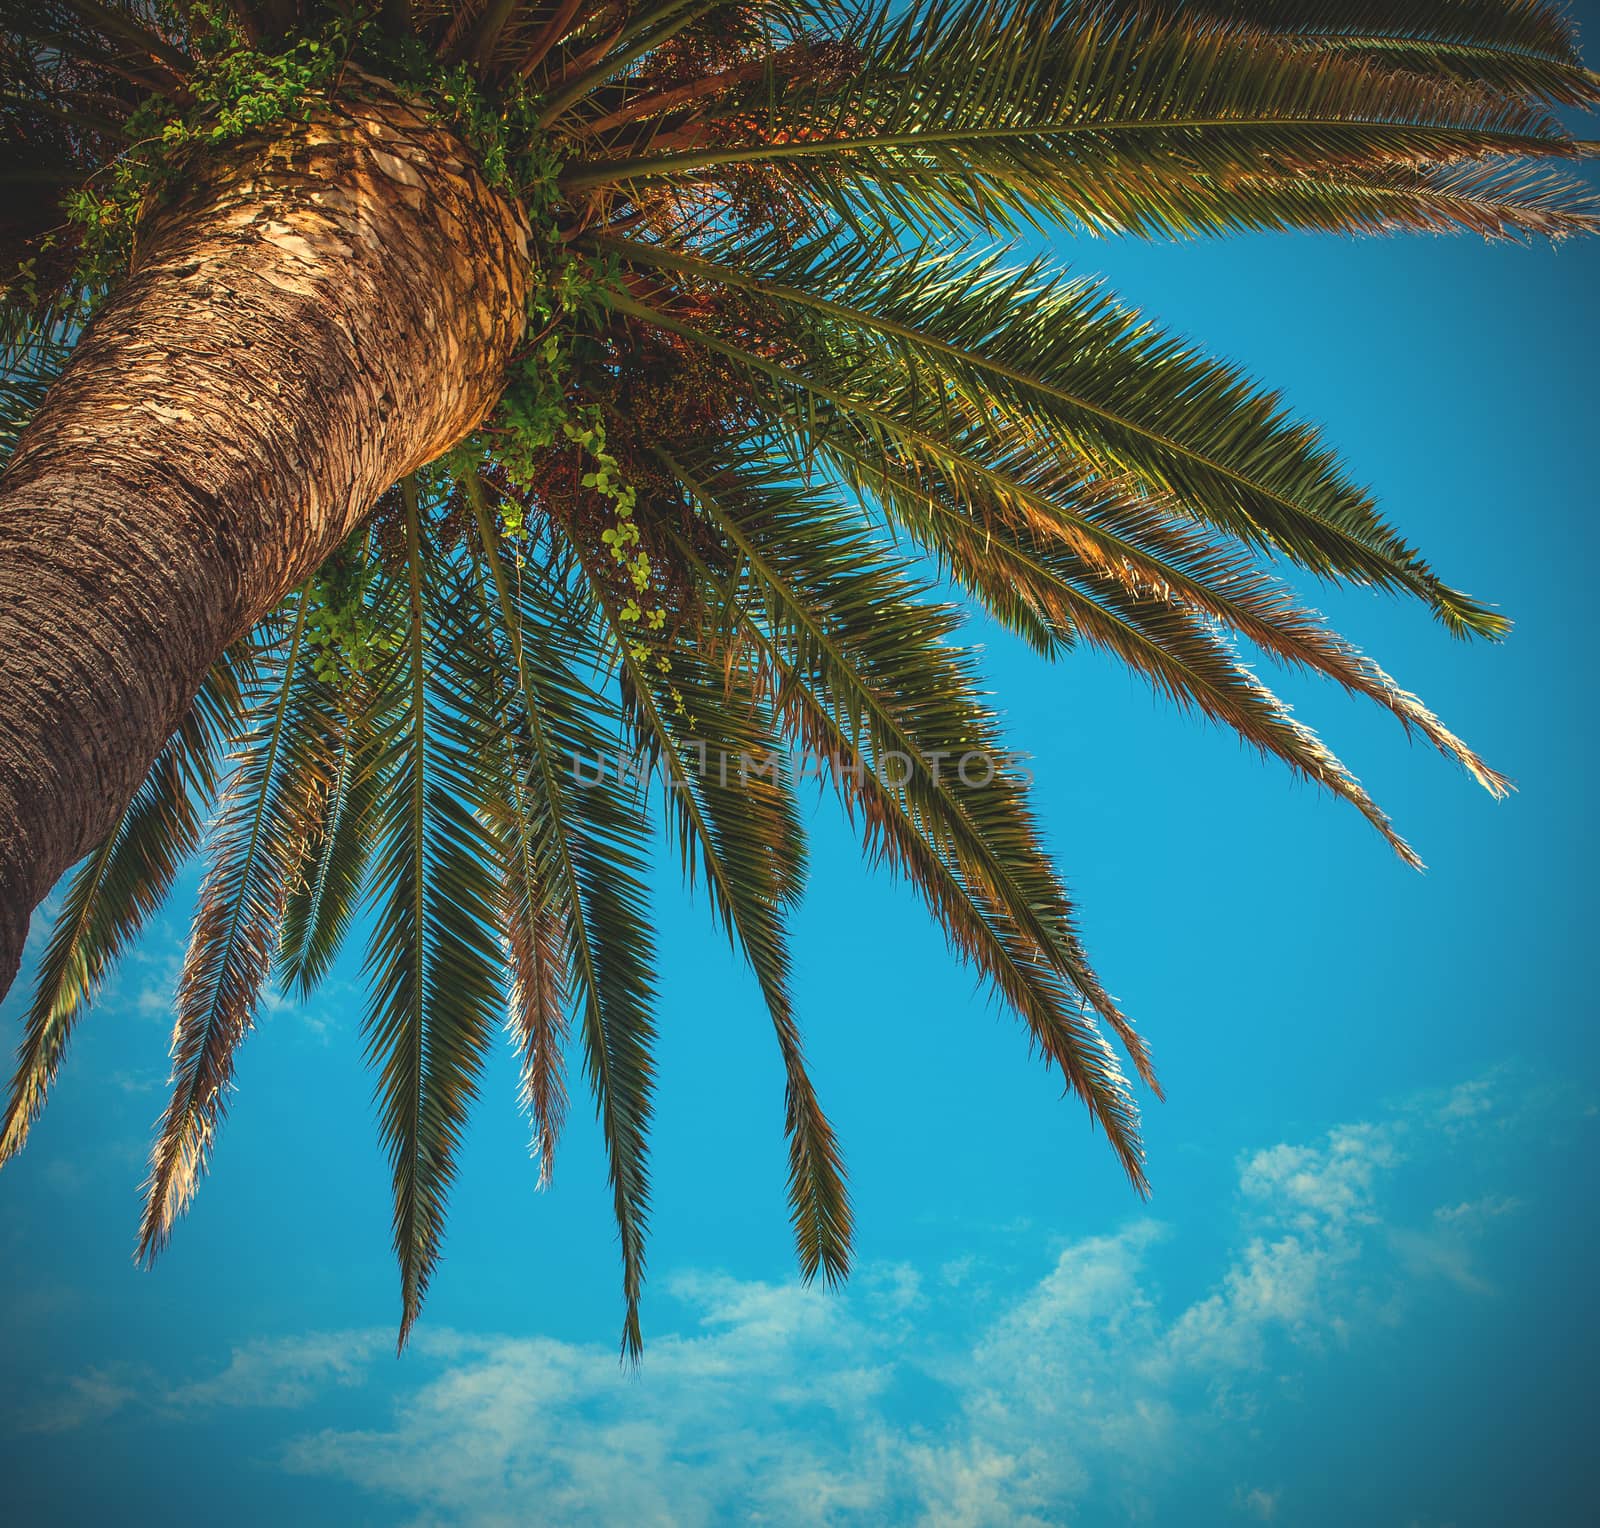 Kroon palms against the blue sky, instagram image style